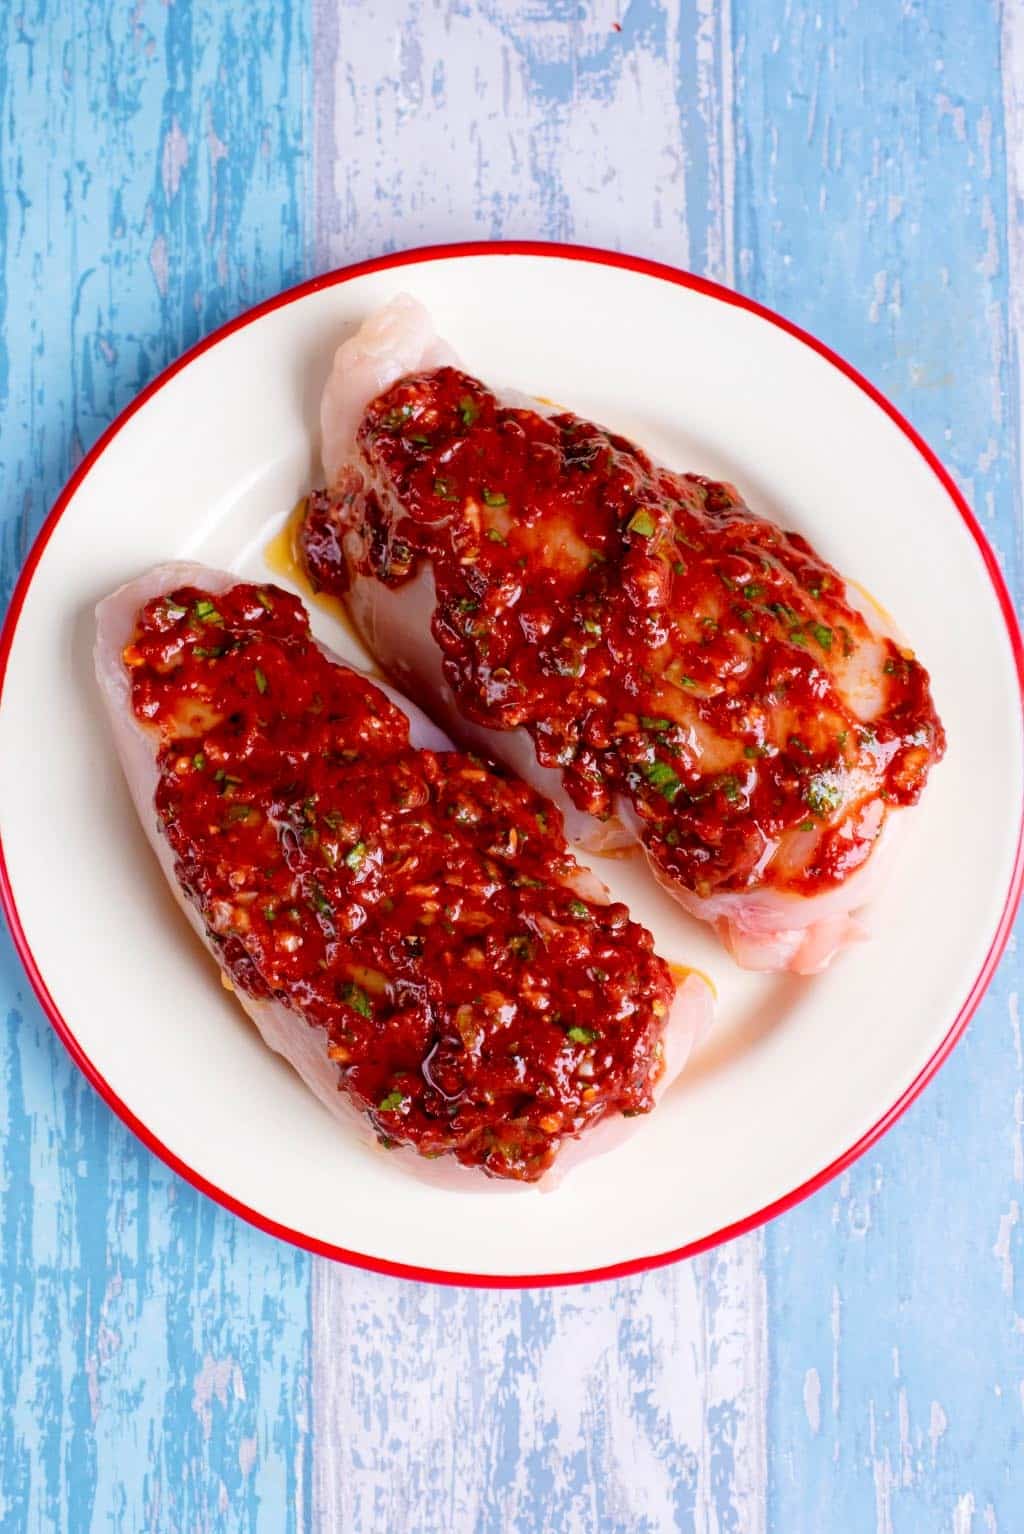 Chicken breasts covered in a tomato marinade.